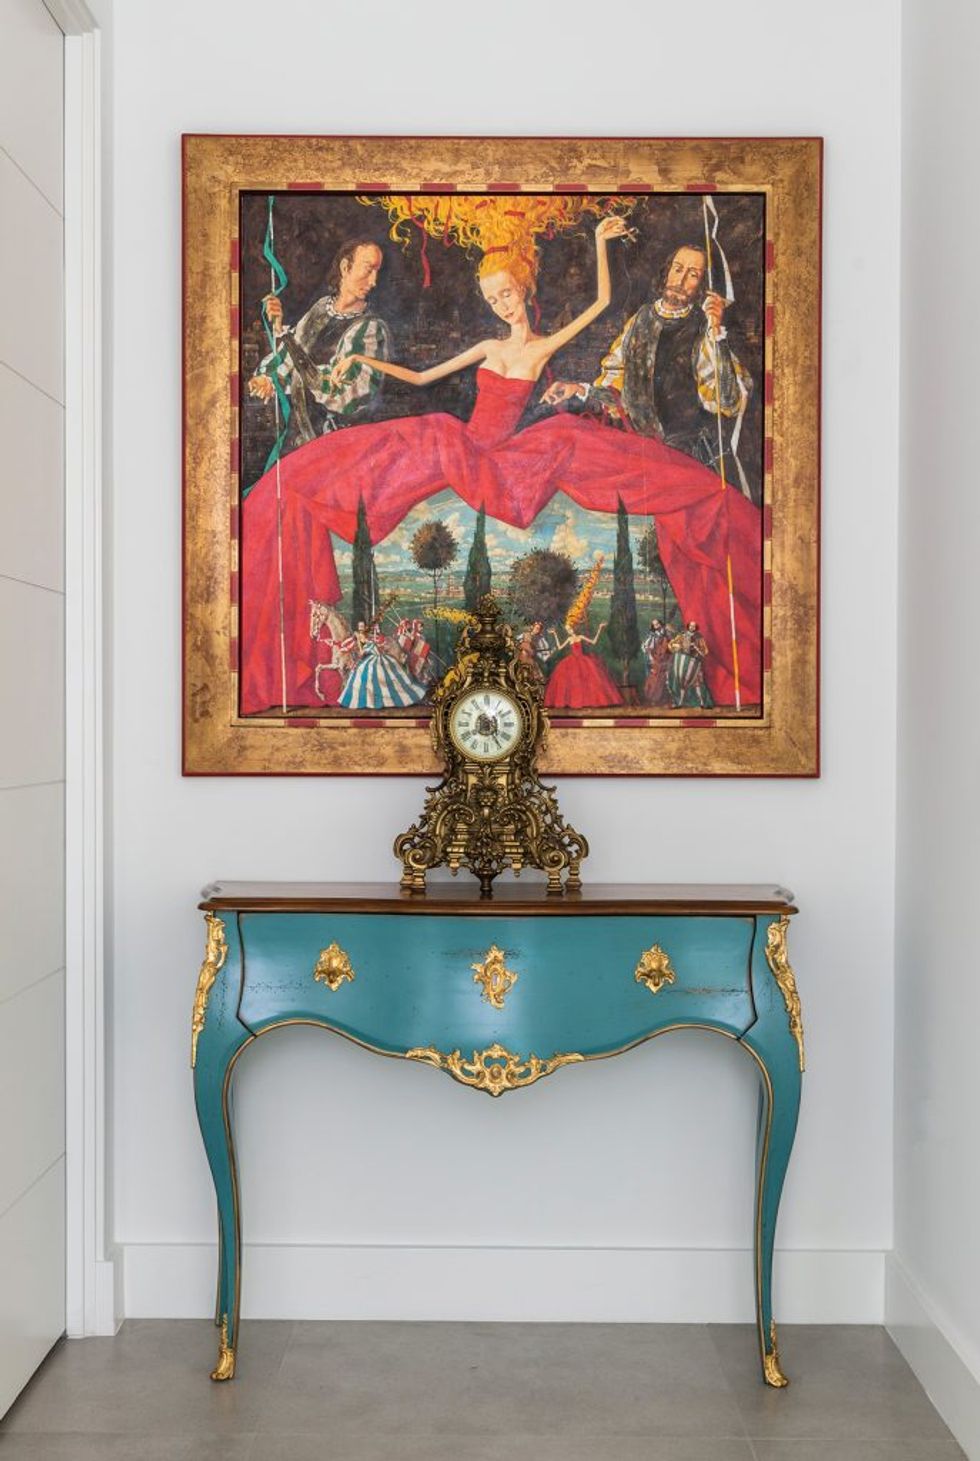 An oil painting by Roman Zaslonov hangs over an antique console